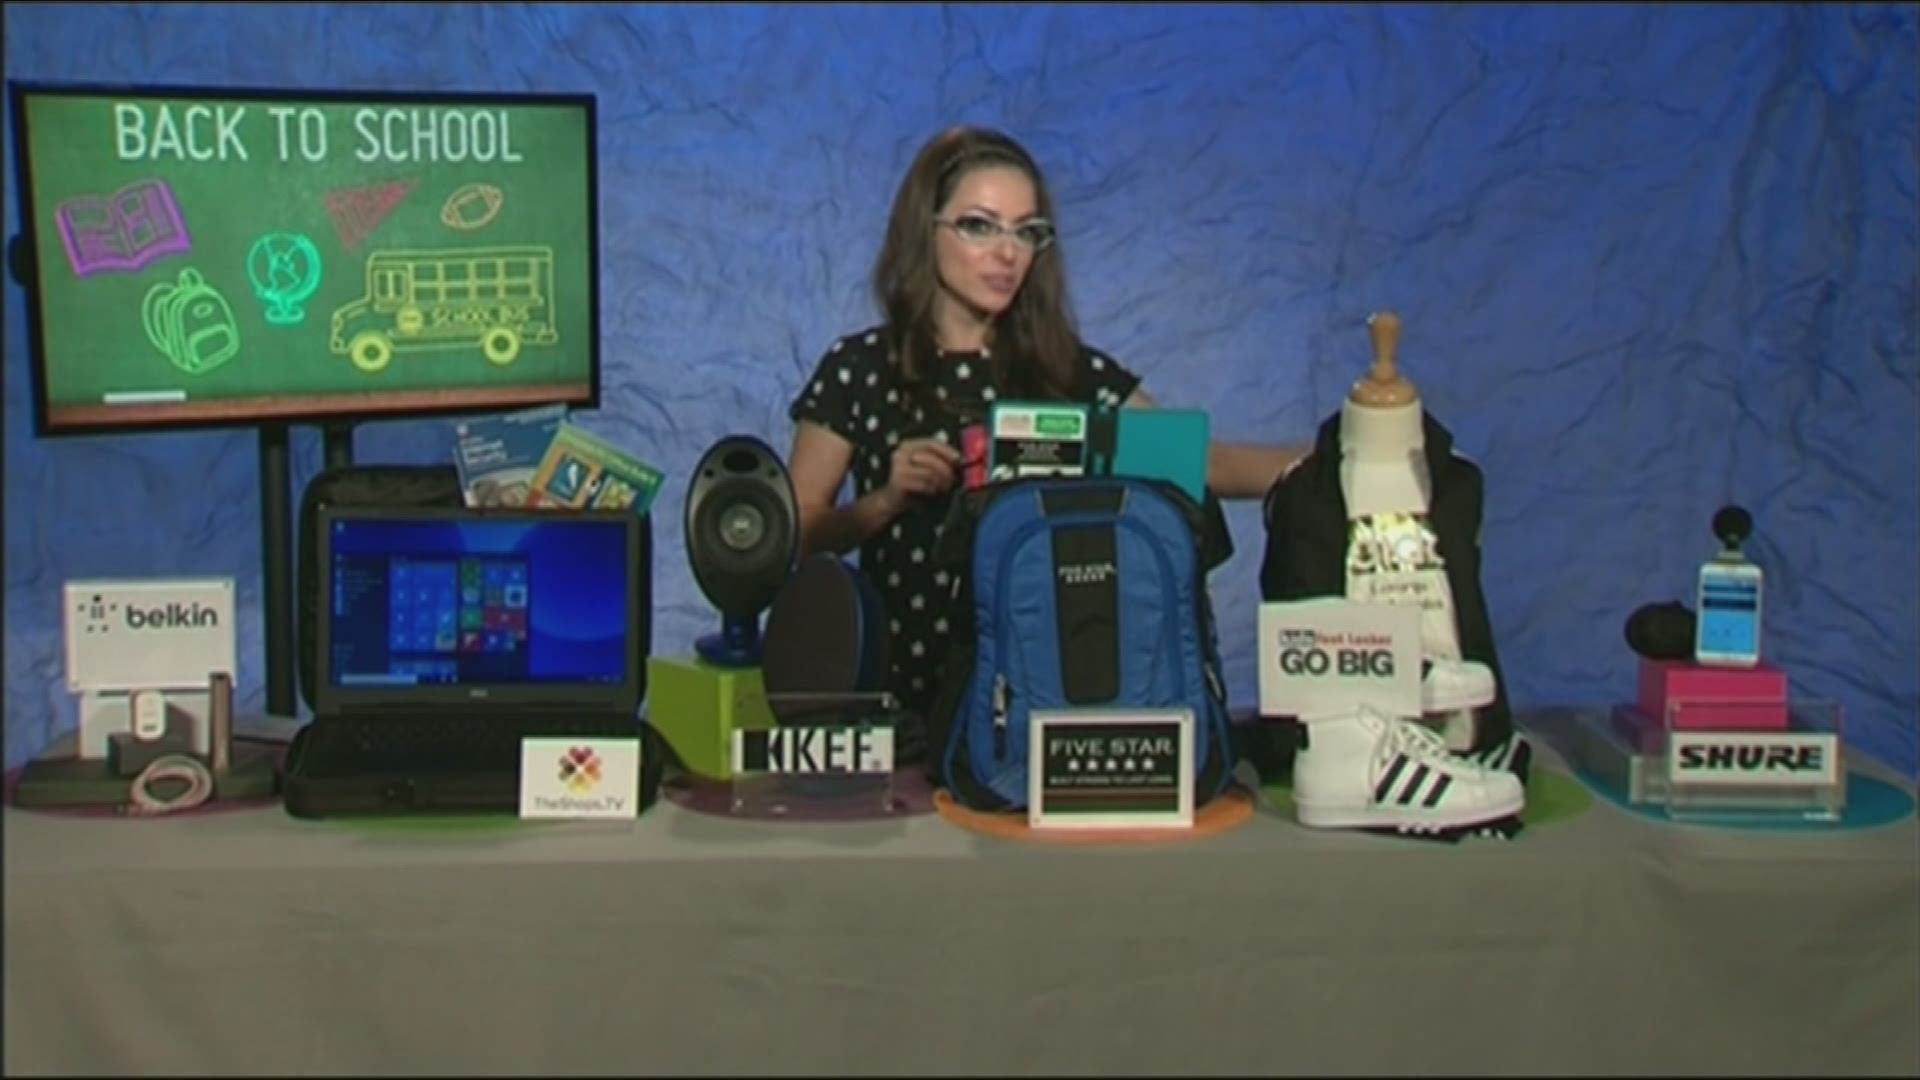 Emmy Award Winning TV Host &amp; Technology Expert Katie Linendoll joins us with "Back to School Must Haves For All Ages!" Contact Info:
www.ThunkNews.com/BackToSchool